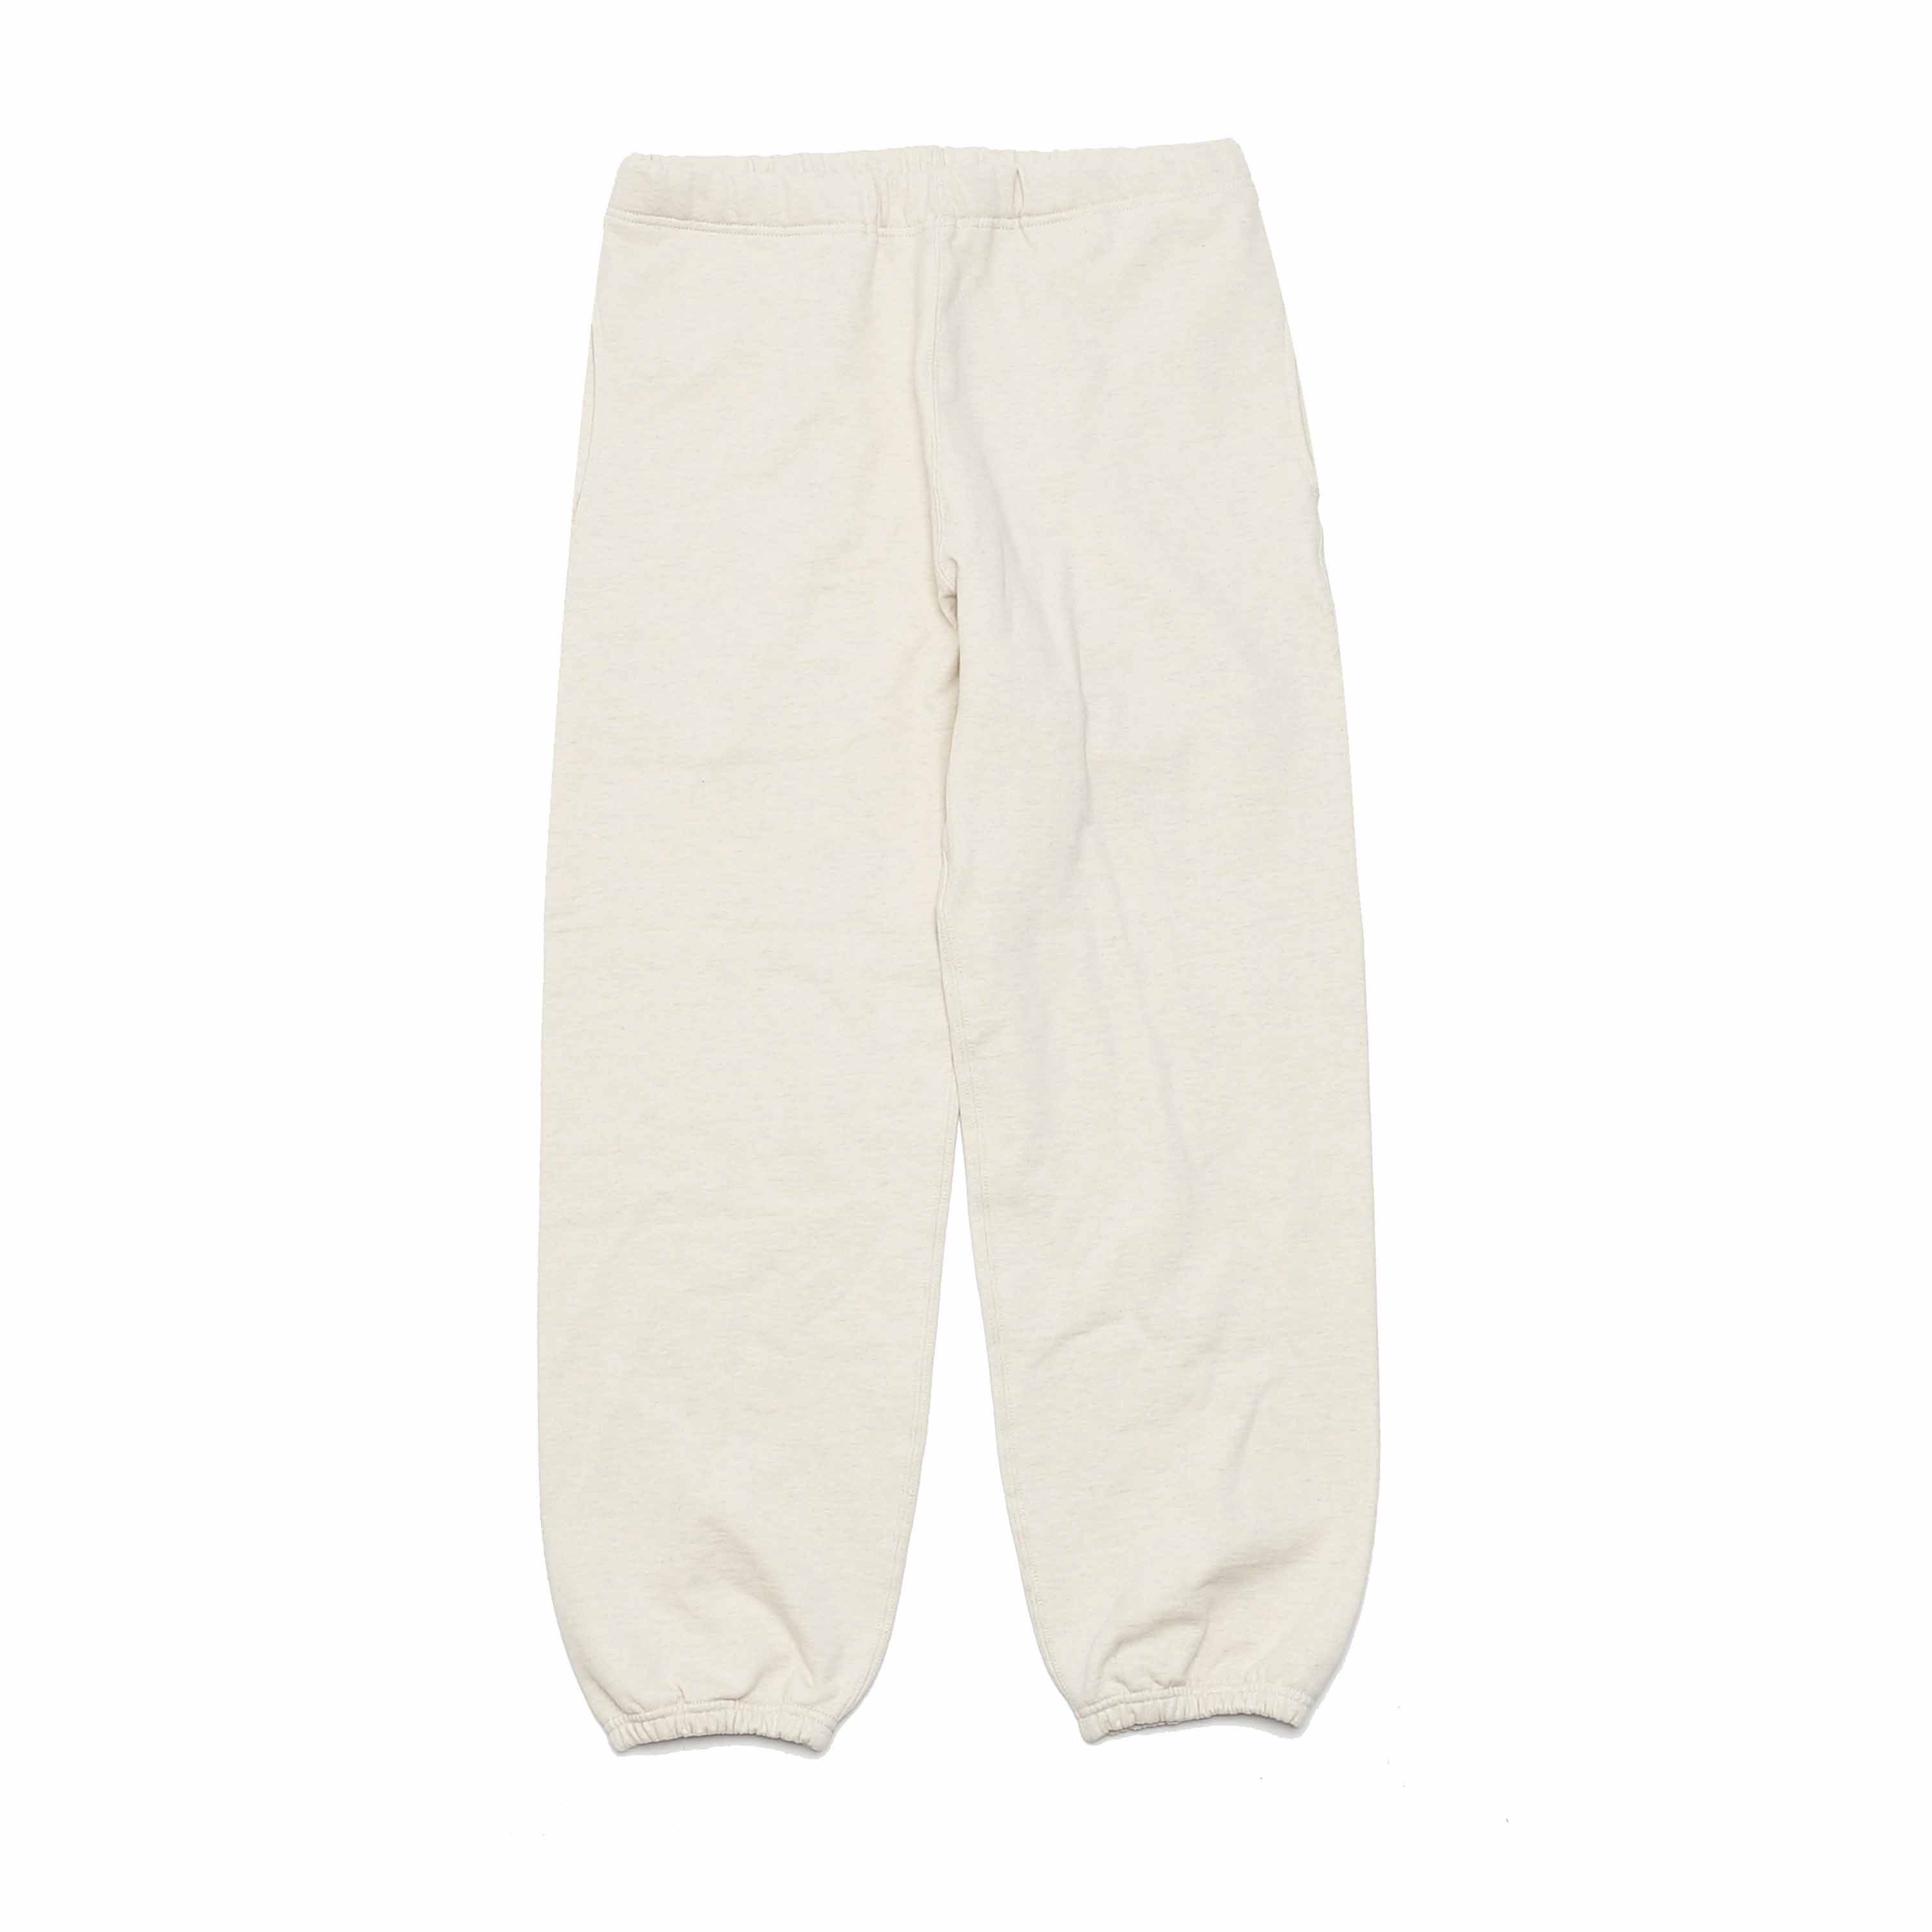 RECYCLED COTTON SWEAT PANTS - OATMEAL